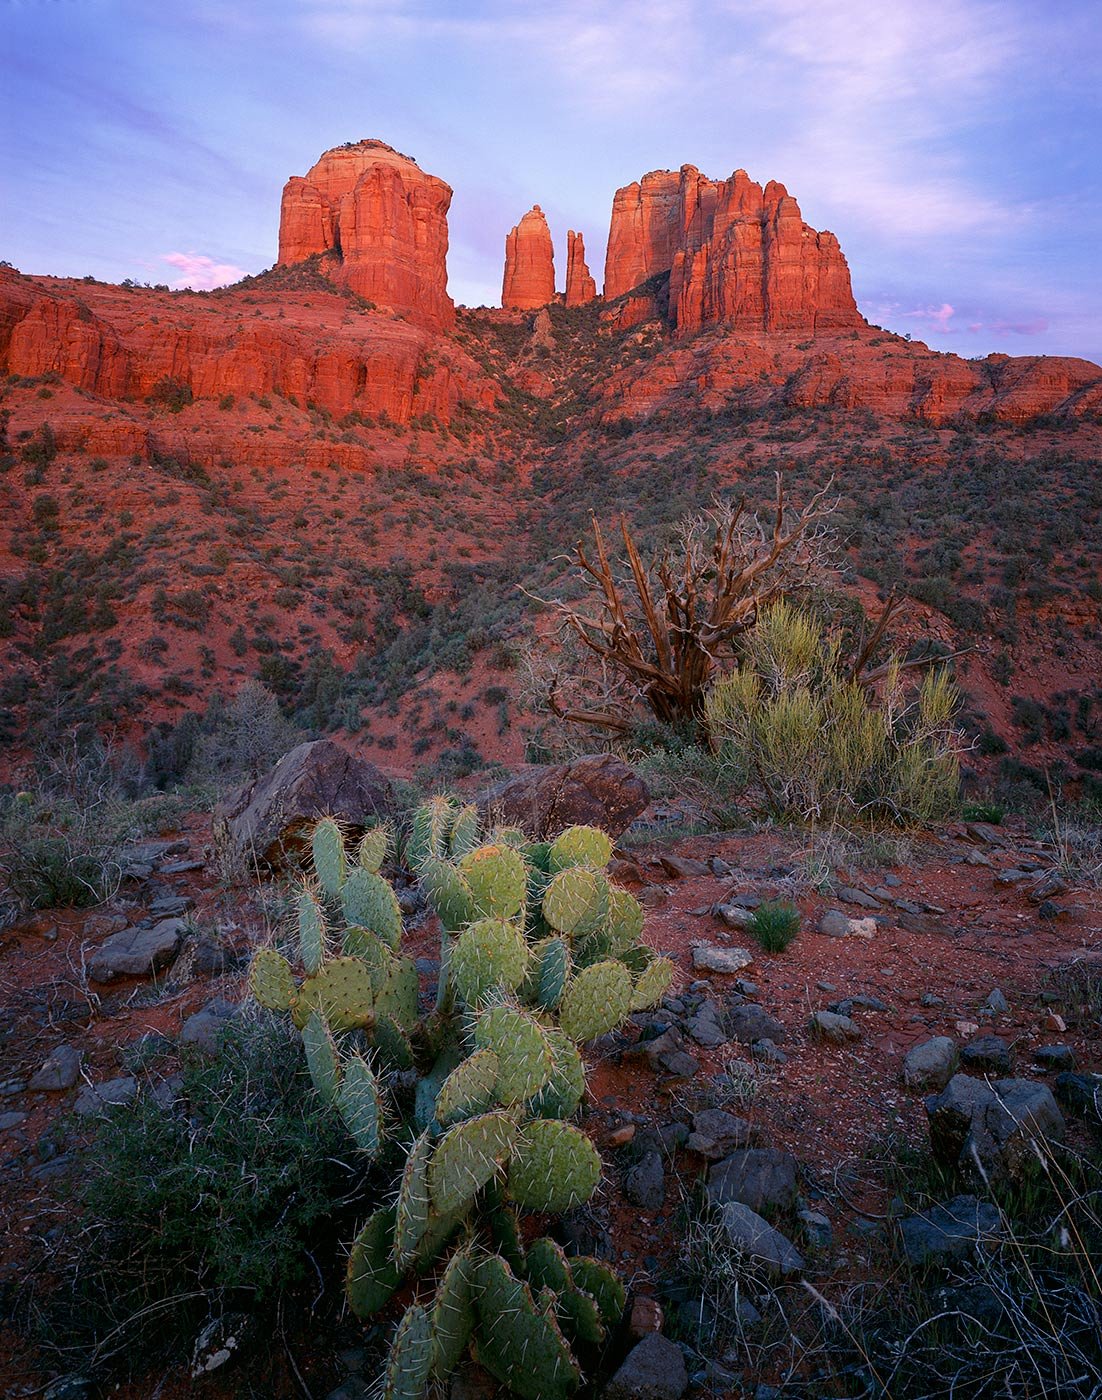 Image of Cathedral Rock and Prickly Pear, Coconino National Forest, Arizona